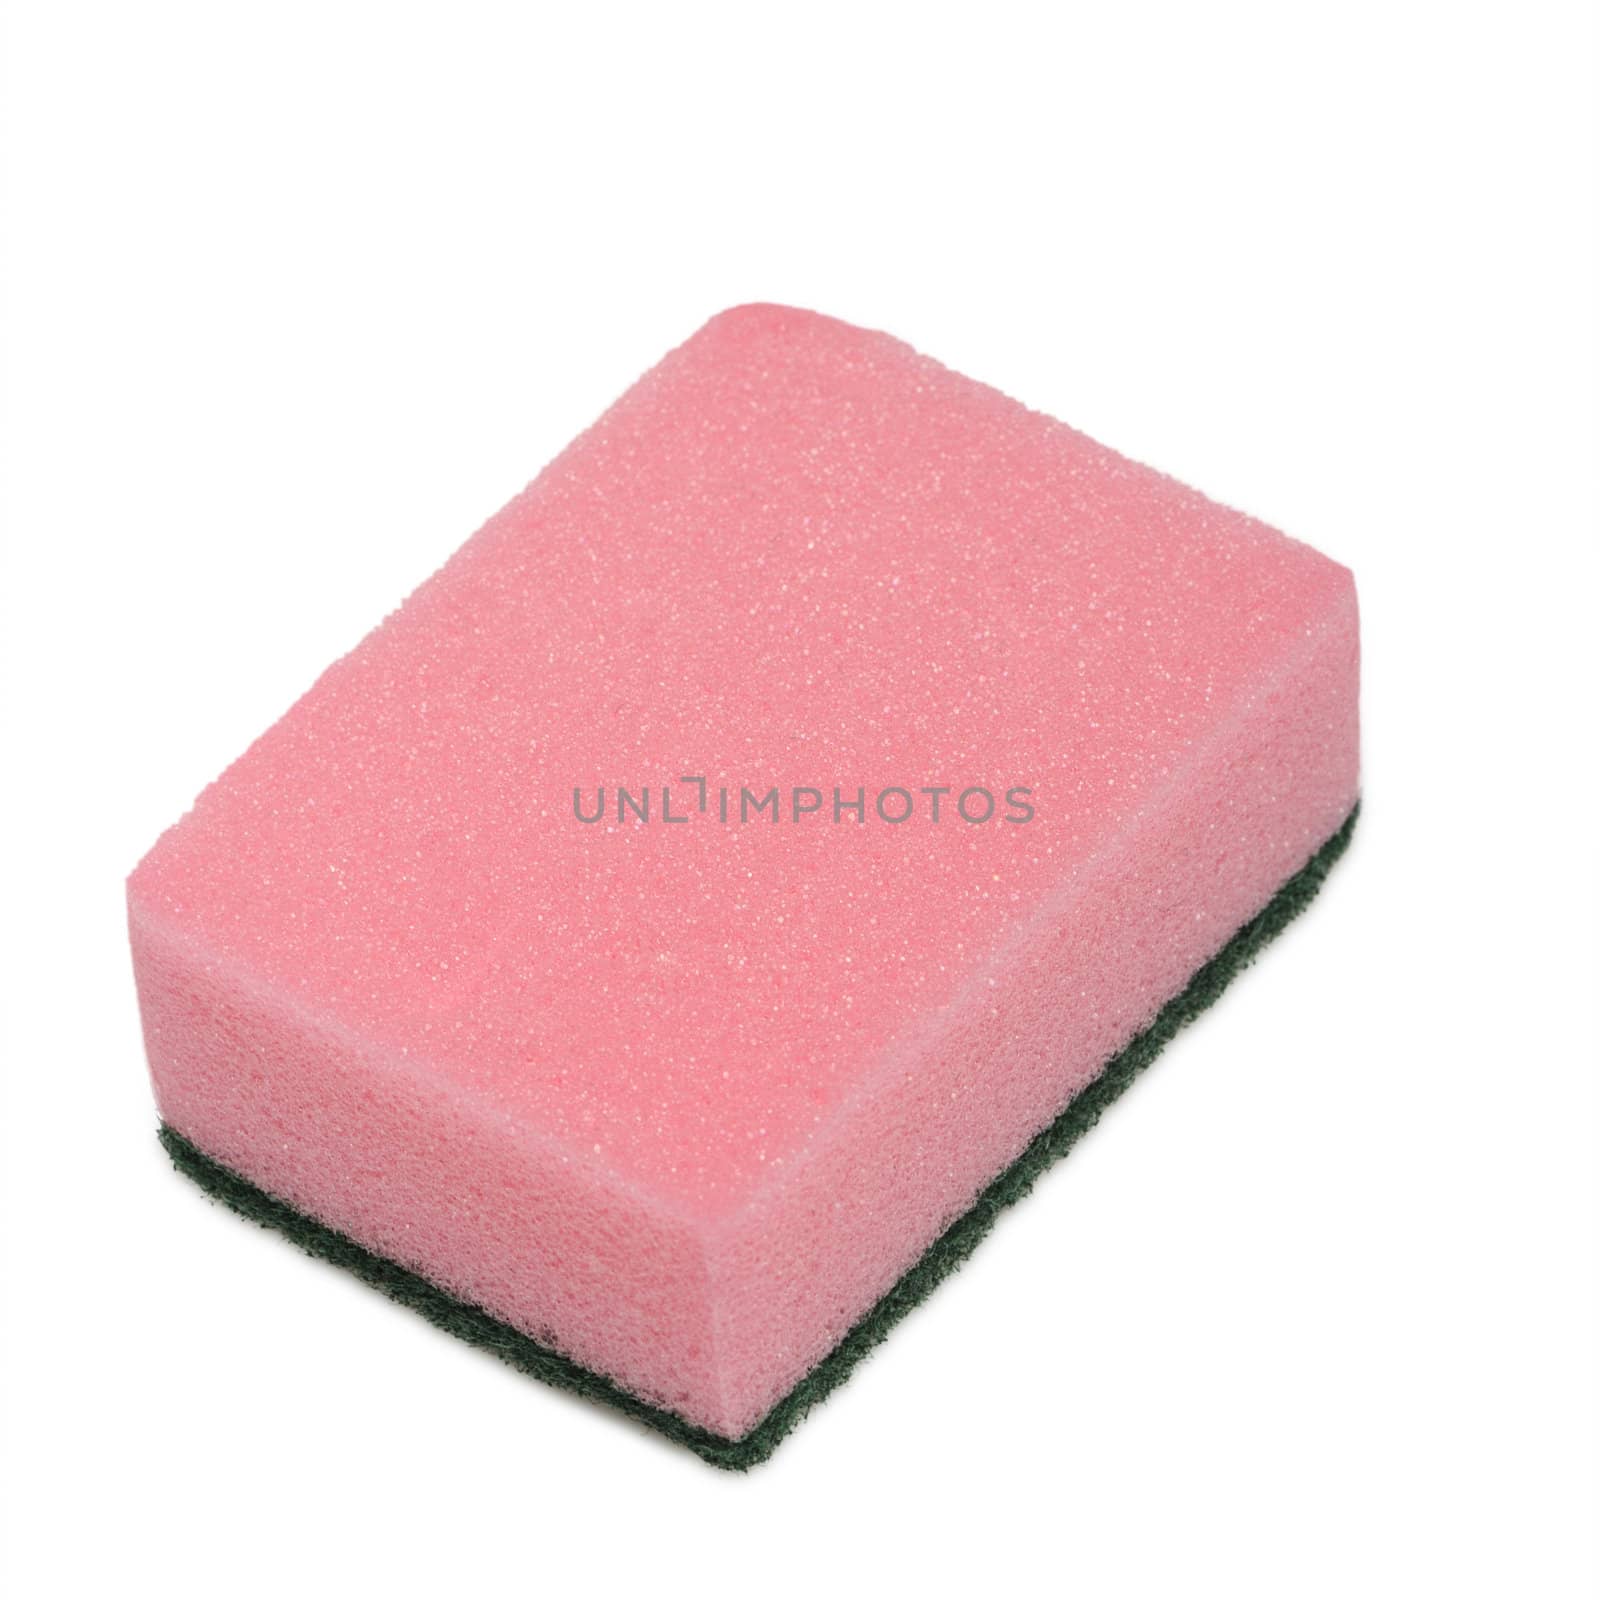 Sponge for washing. It is isolated on a white background.